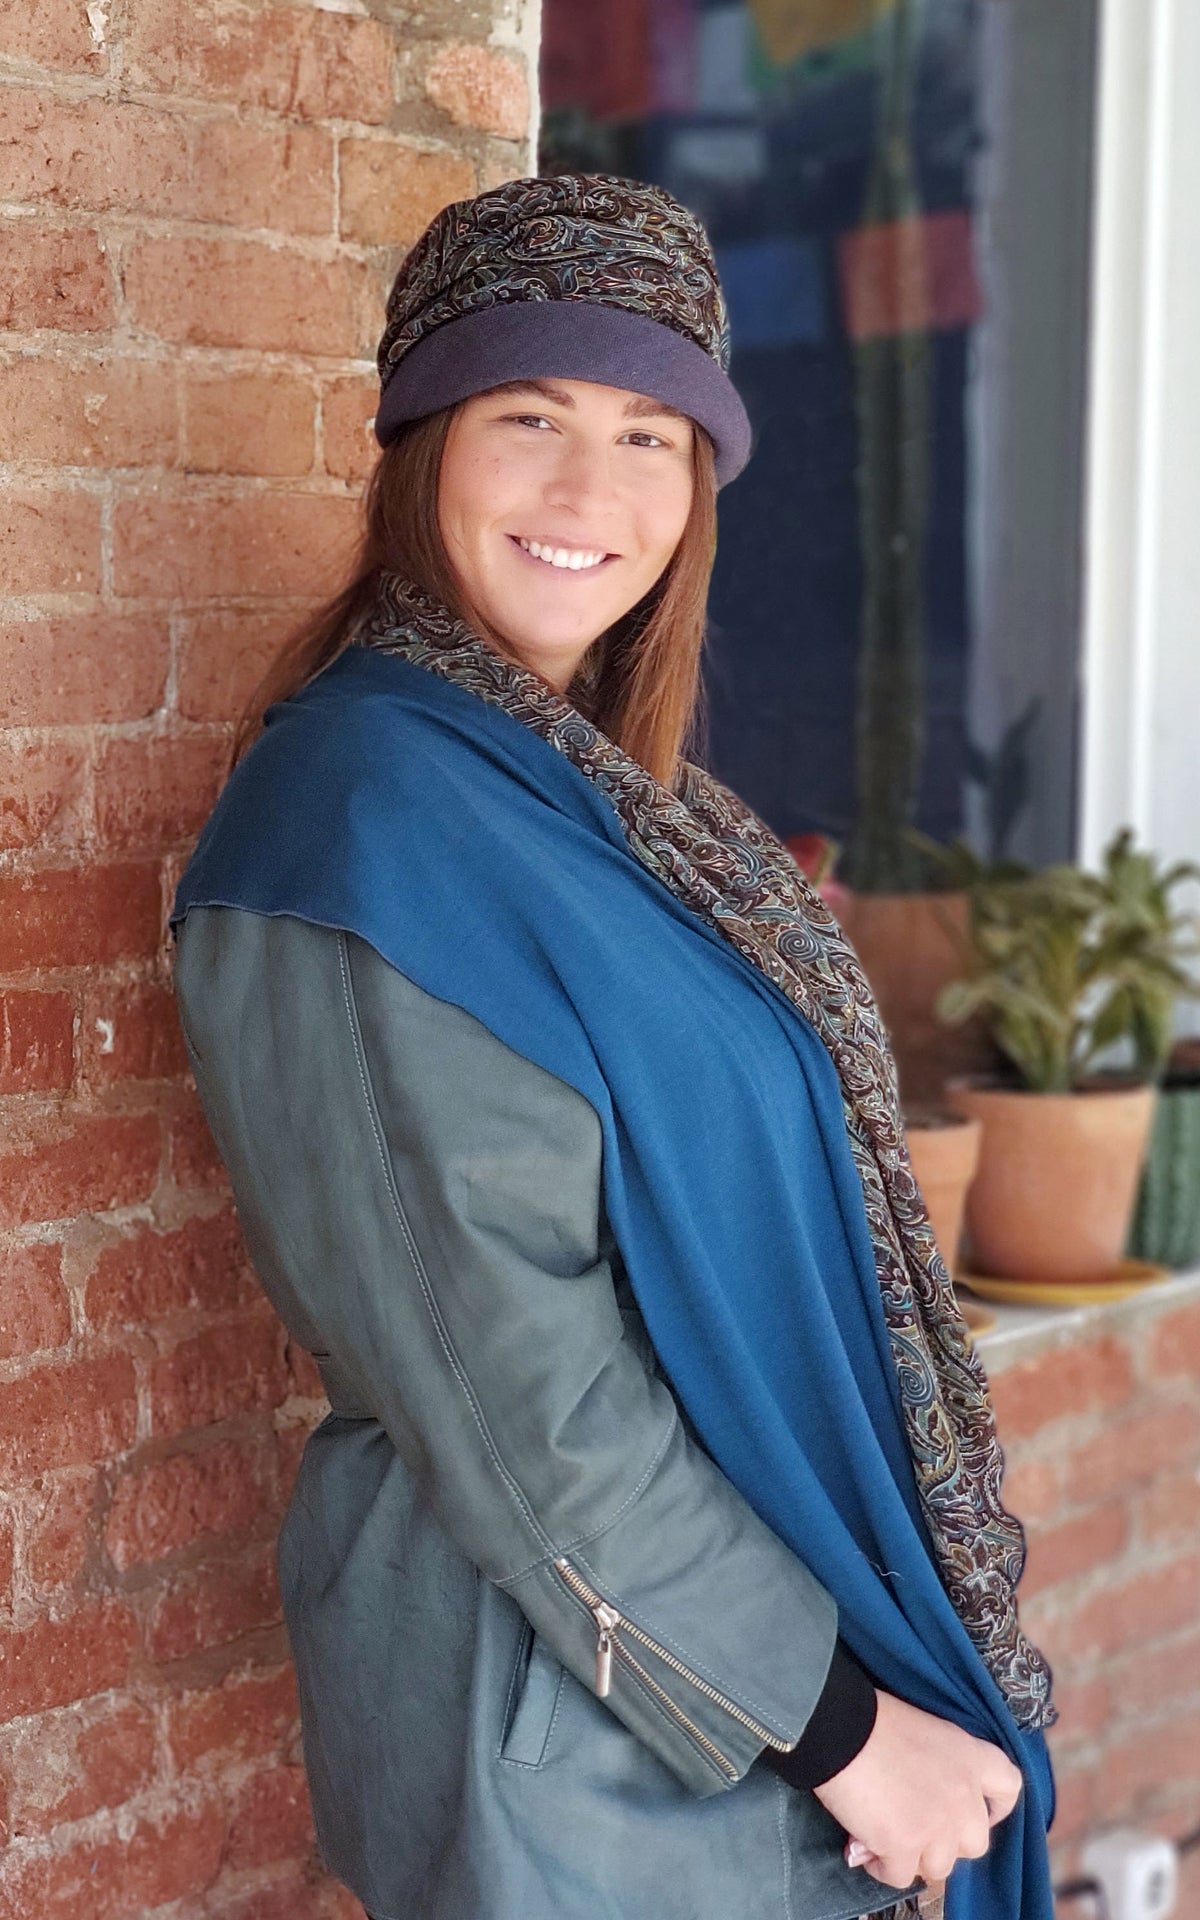 Model against a brick wall wearing Ana 1920’s cloche style hat and matching  Handkerchief Scarf, Wrap | Peacock Paisley Chiffon in blue, greens, and browns | Handmade in Seattle WA | Pandemonium Millinery